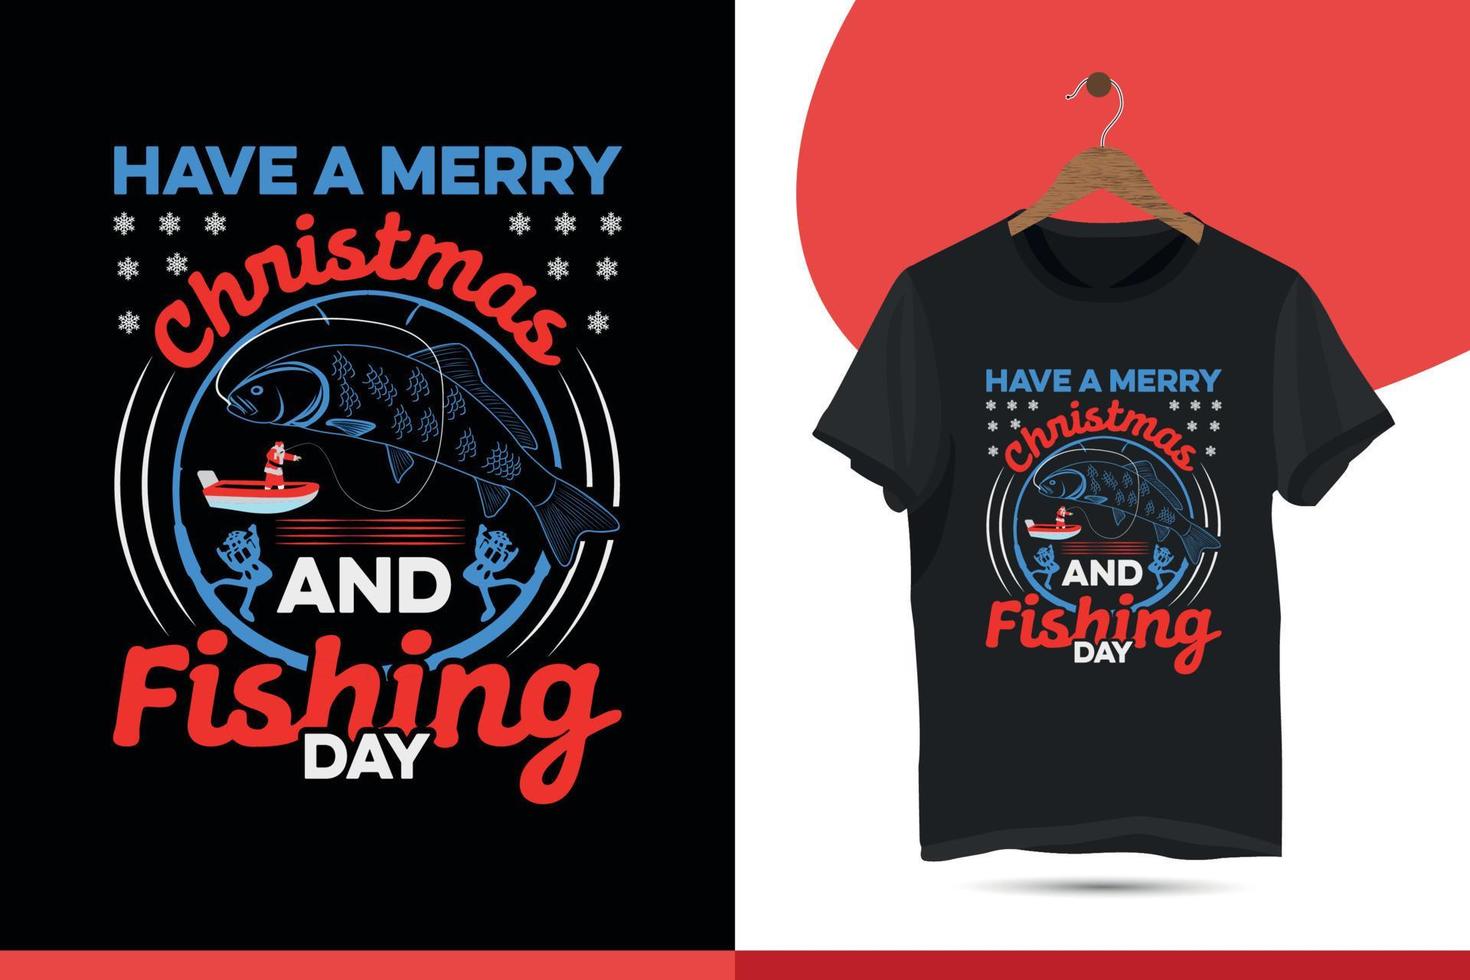 Have a merry Christmas and fishing. Christmas T-shirt Design for